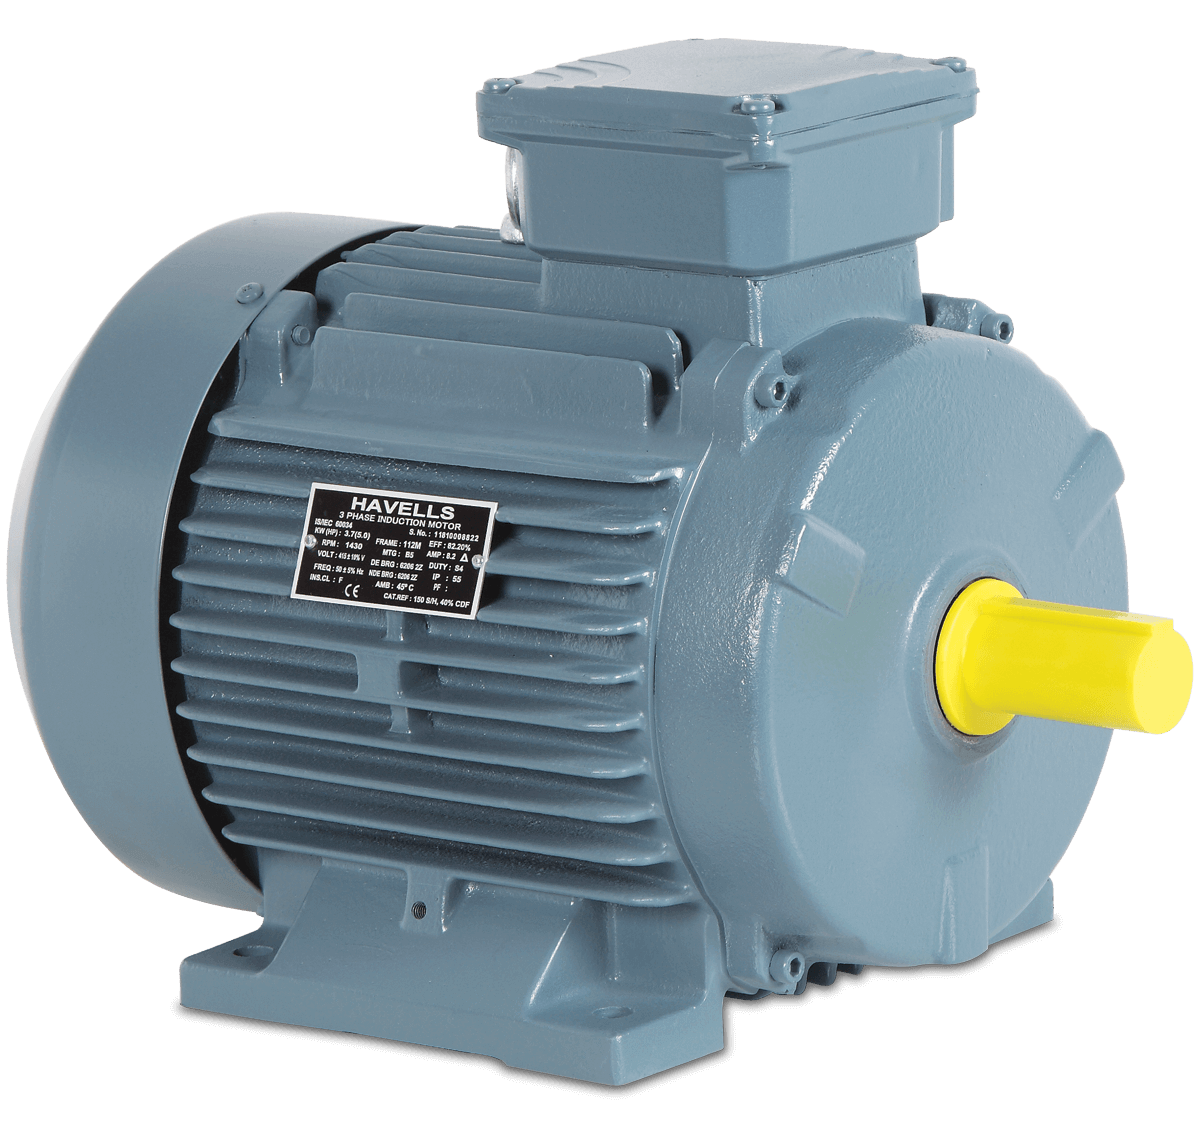 Havells Electric industrial Motors for use with cranes and hoists